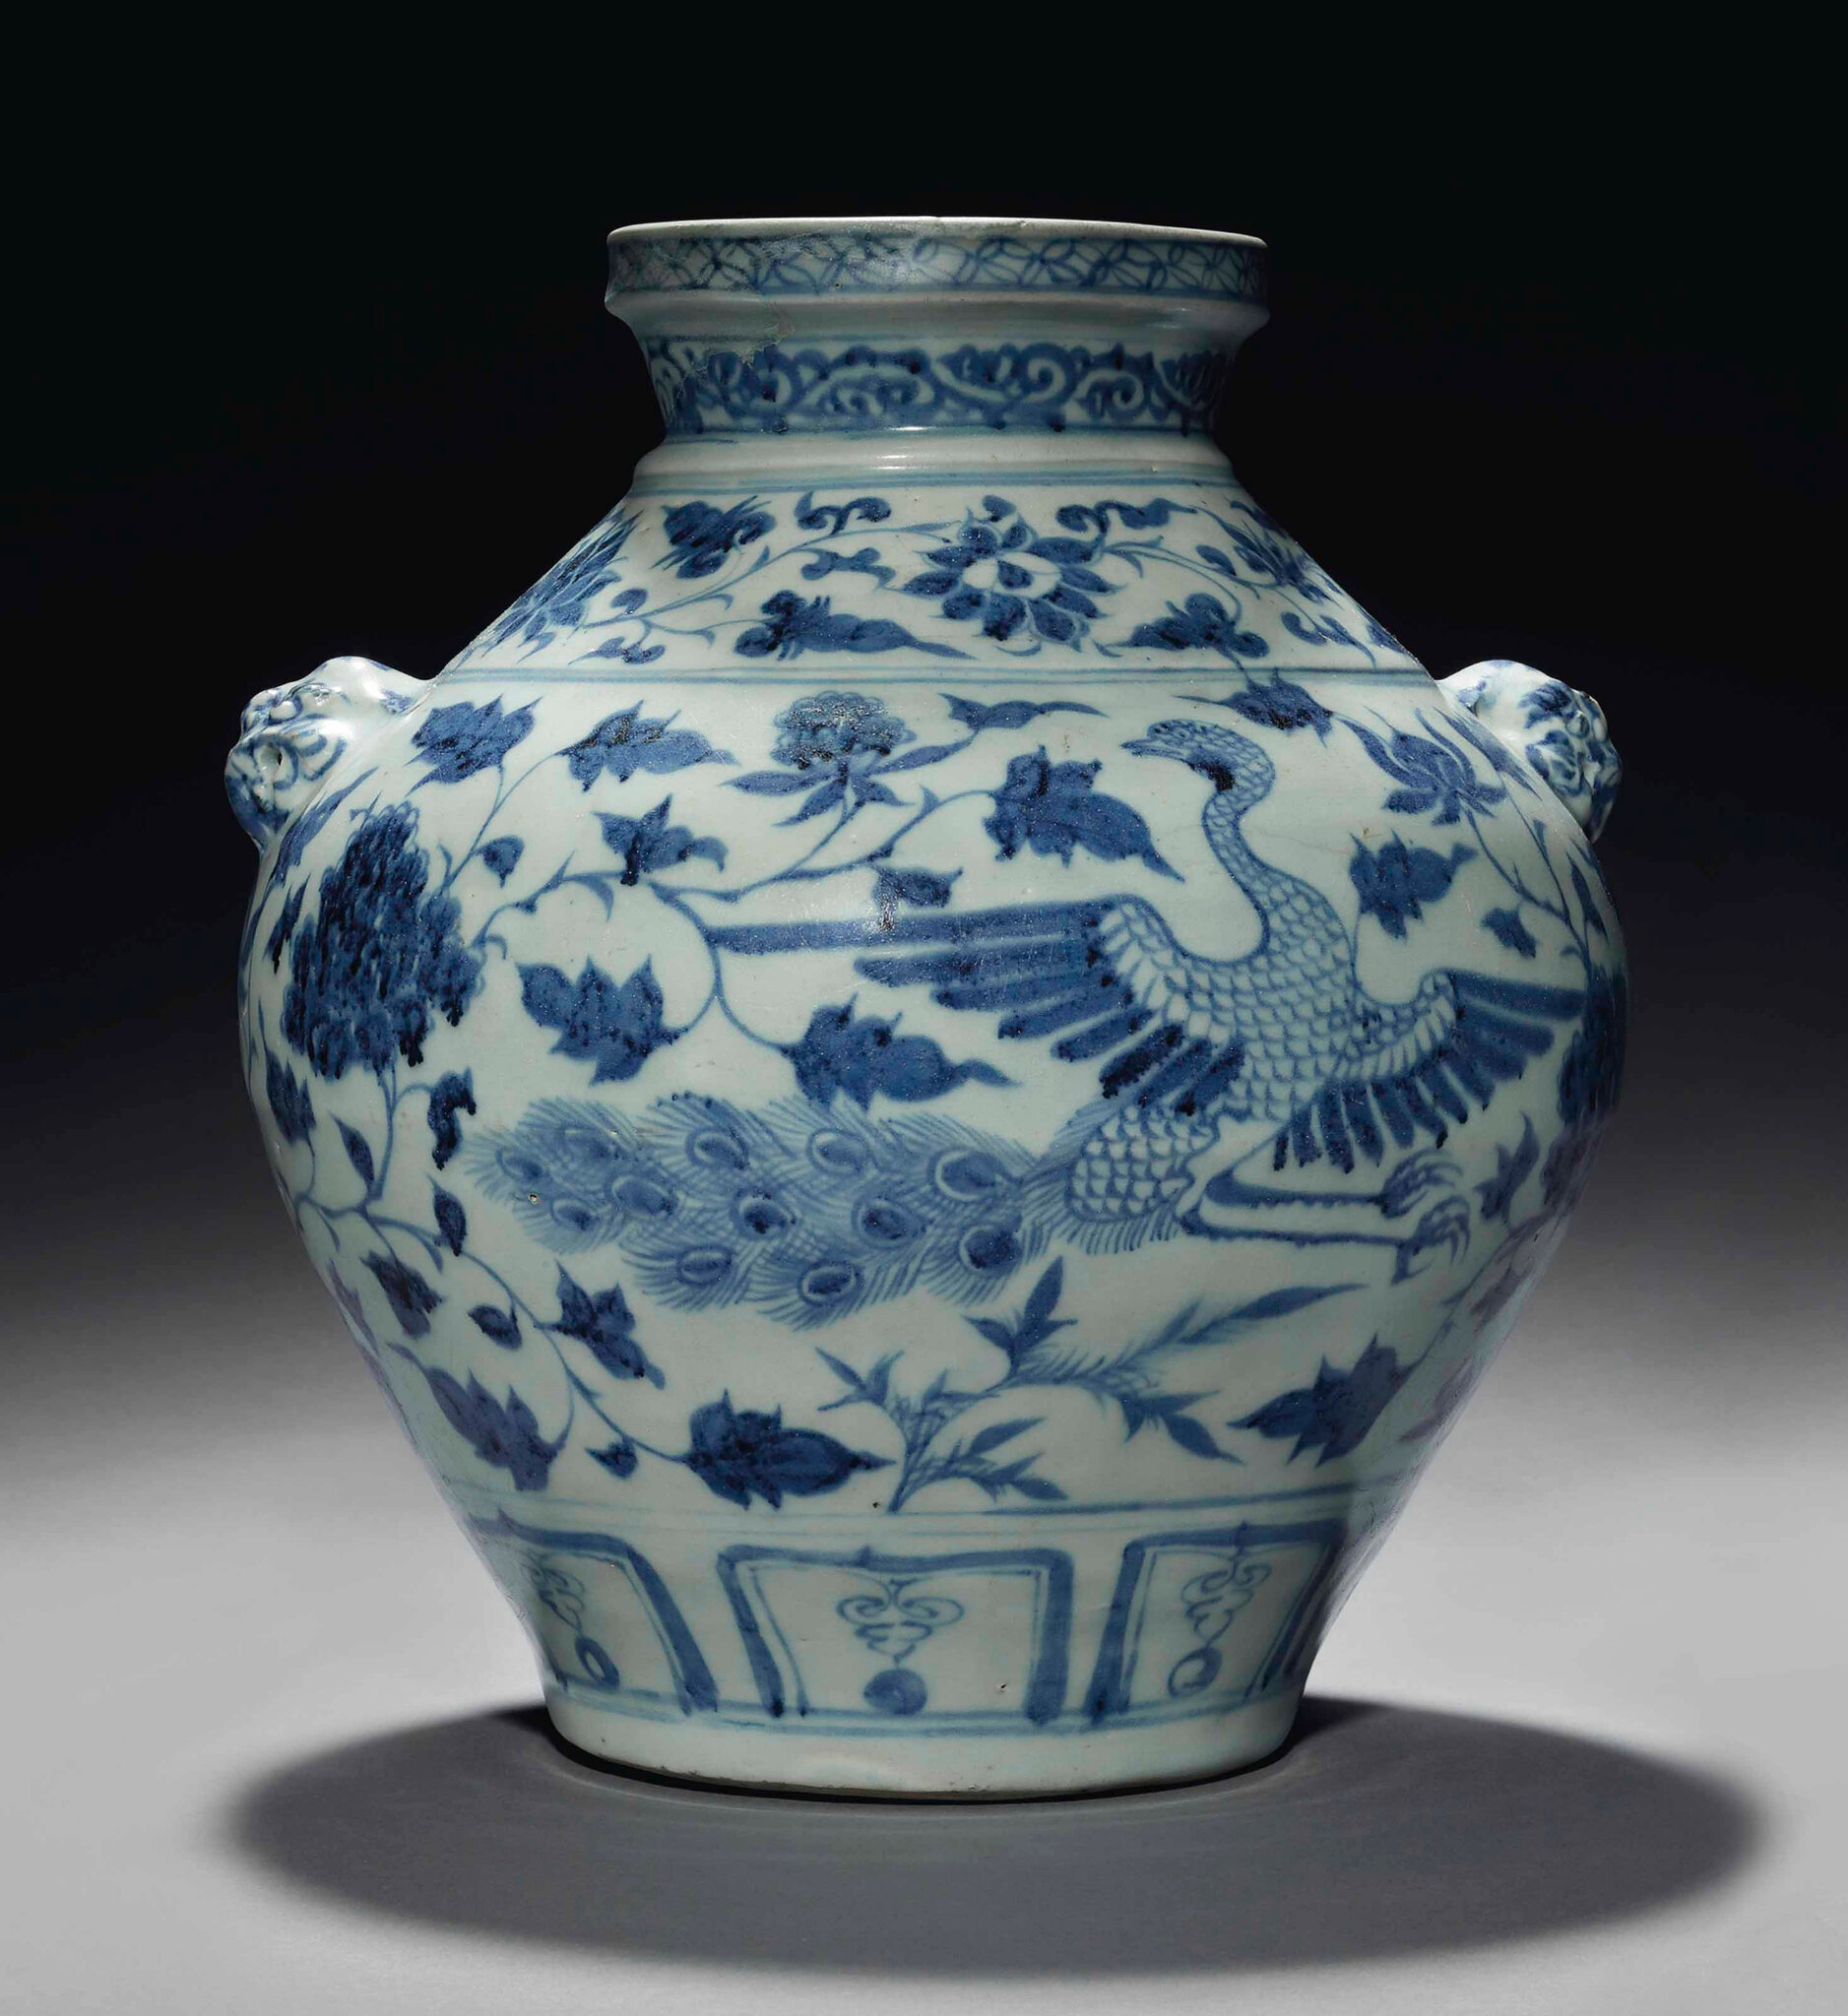 A very rare blue and white 'Peacock' jar, guan, Yuan dynasty (1279-1368)